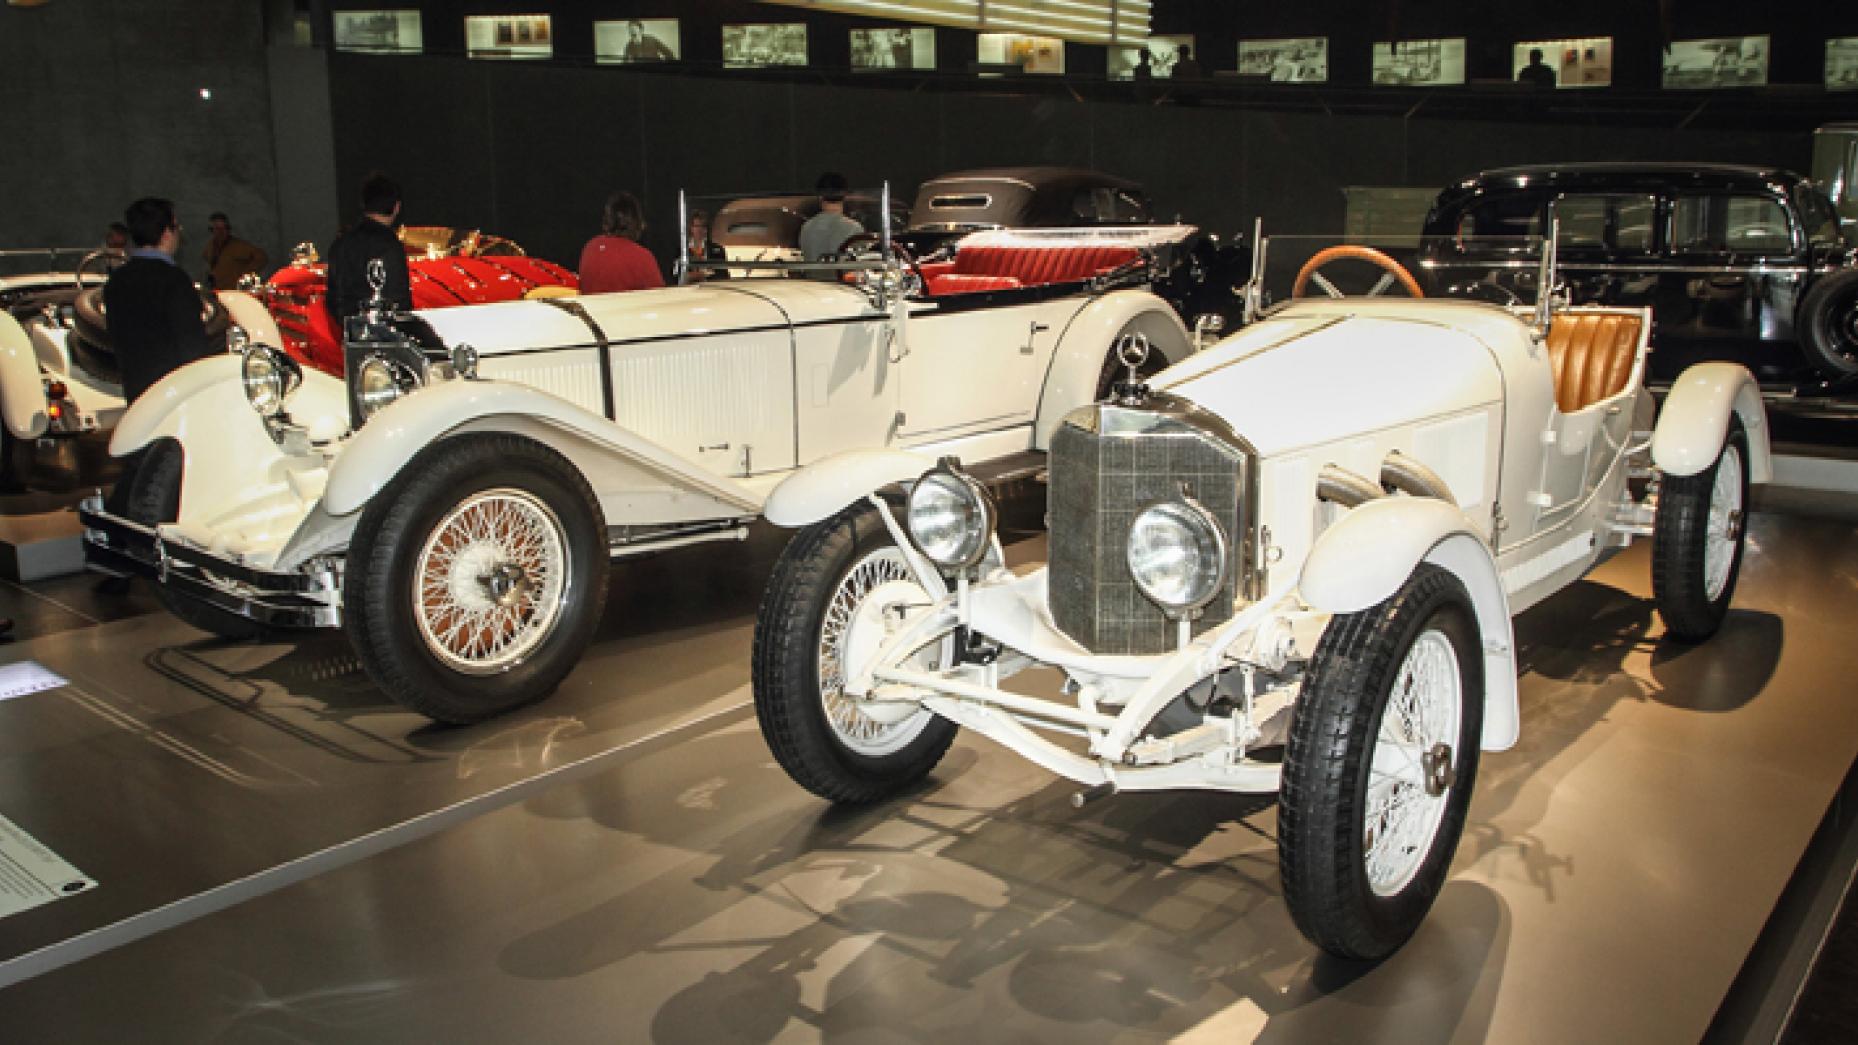 1923 MERCEDES SPORT-ZWEISITZER: Now we’re talking serious powerrr: these became the world’s first passenger production cars with supercharged engines, boosting power from the Merc’s engine from 40hp to 65hp. They built 851 of these.